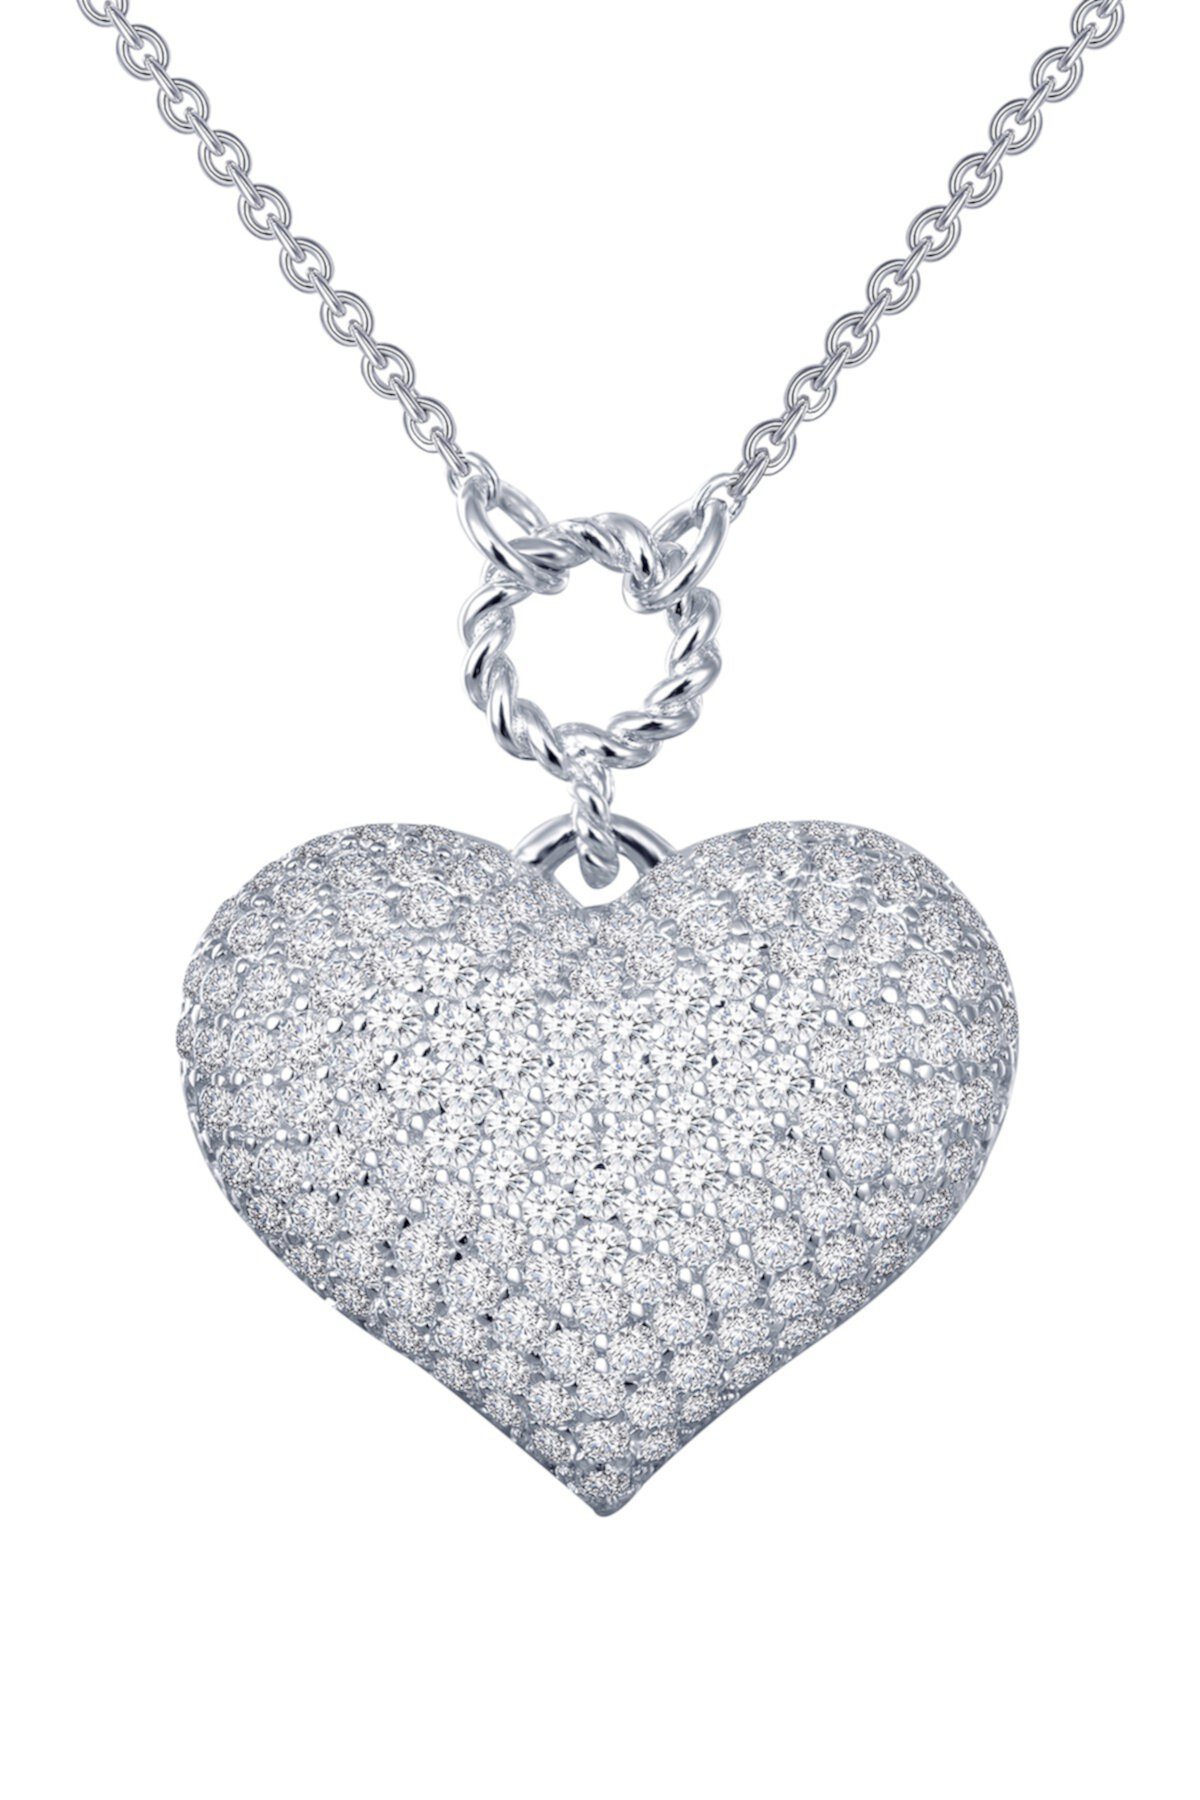 Platinum Plated Sterling Silver Micro Pave Puffy Heart Pendant Necklace LaFonn